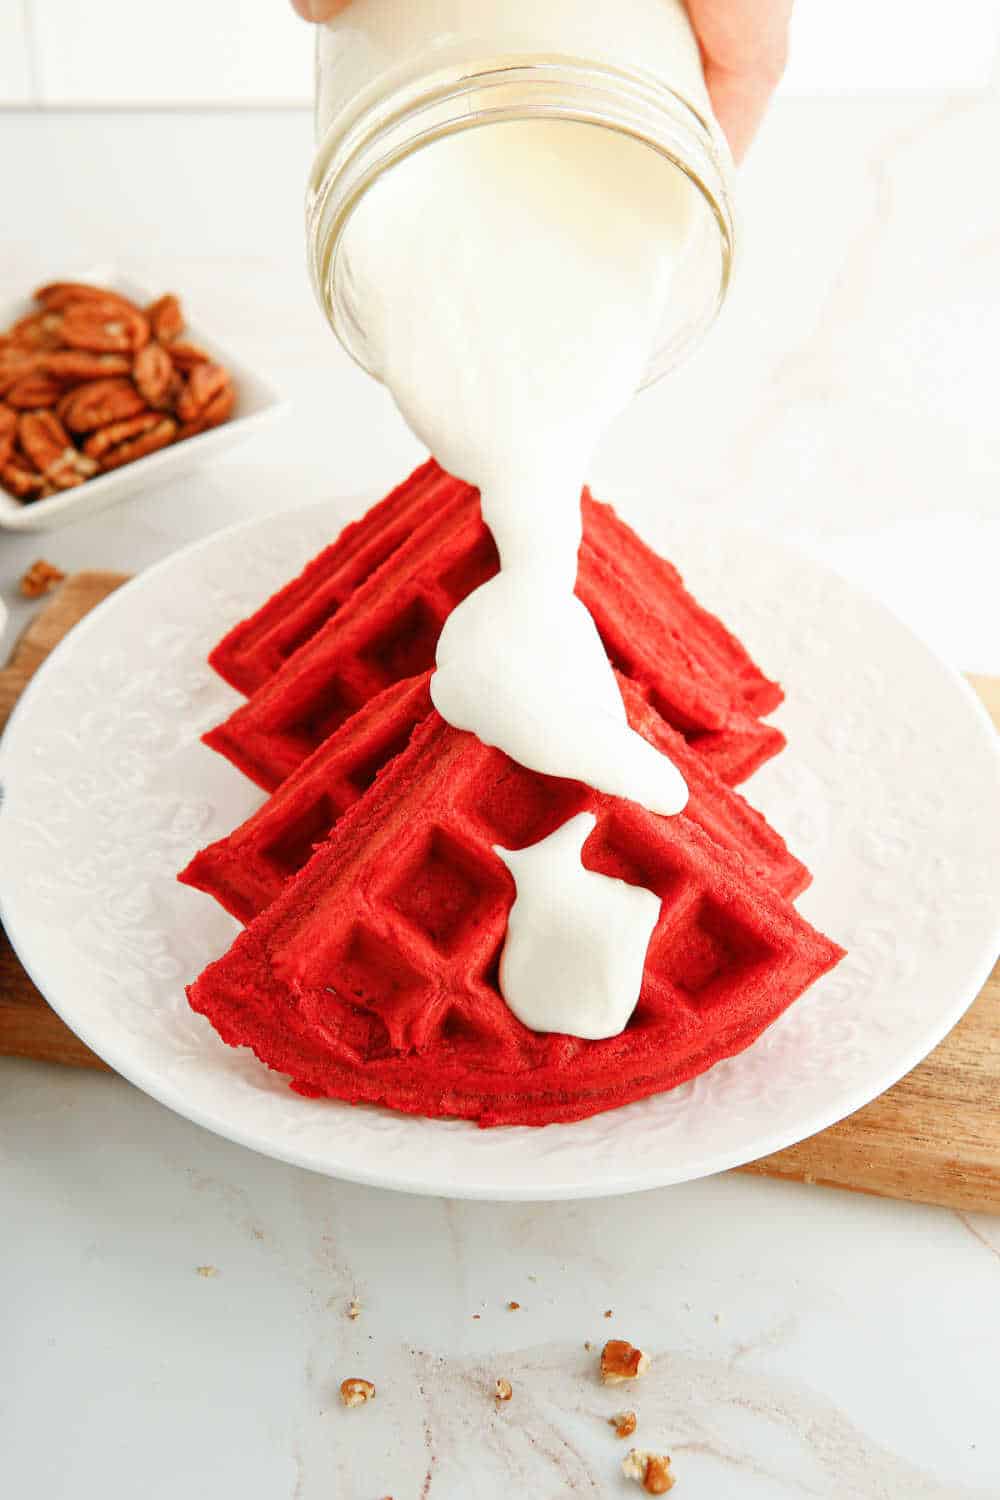 cream cheese topping being poured on red velvet waffles.